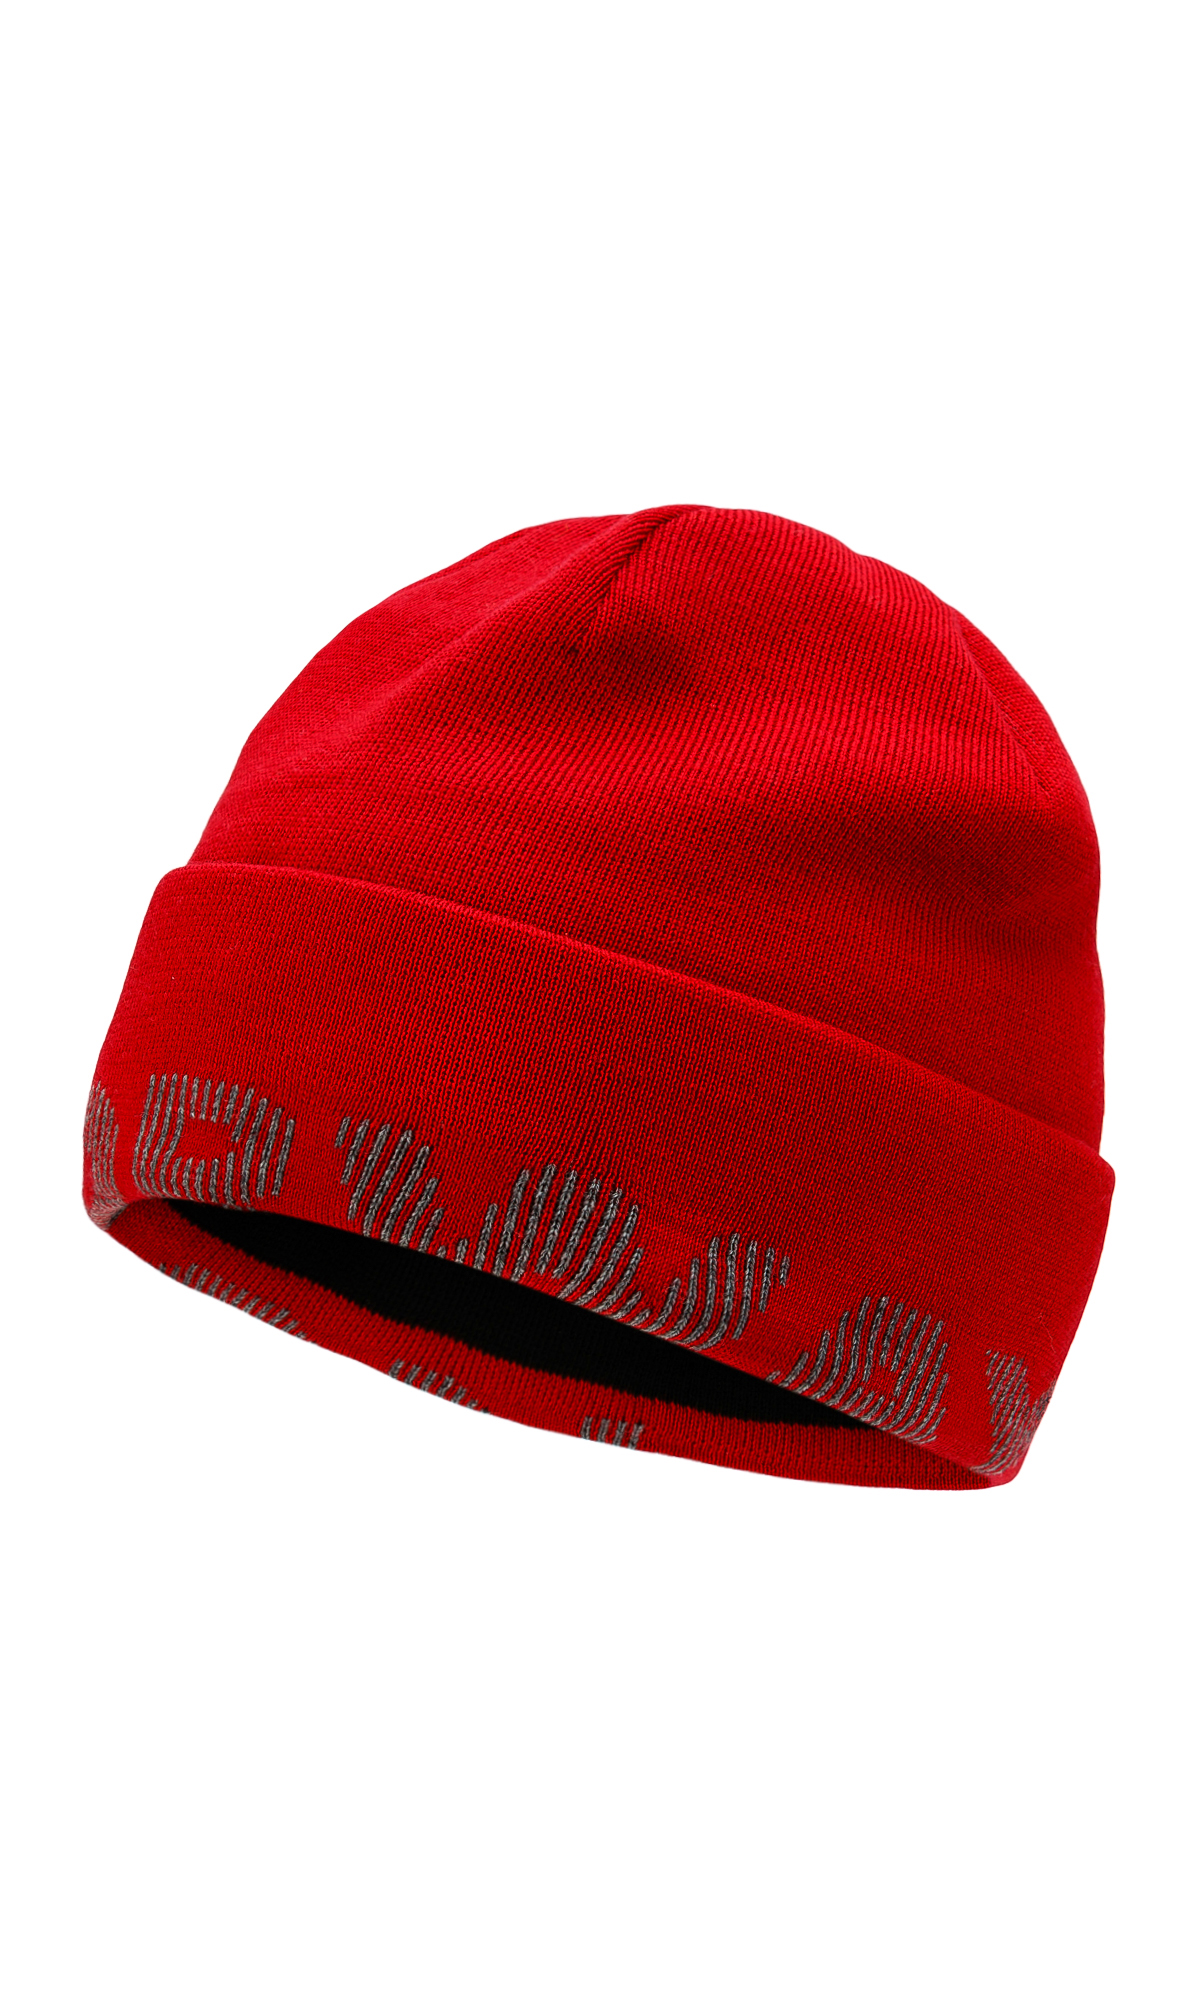 Team Norway Hat - Unisex - Red - Dale of Norway - Dale of Norway